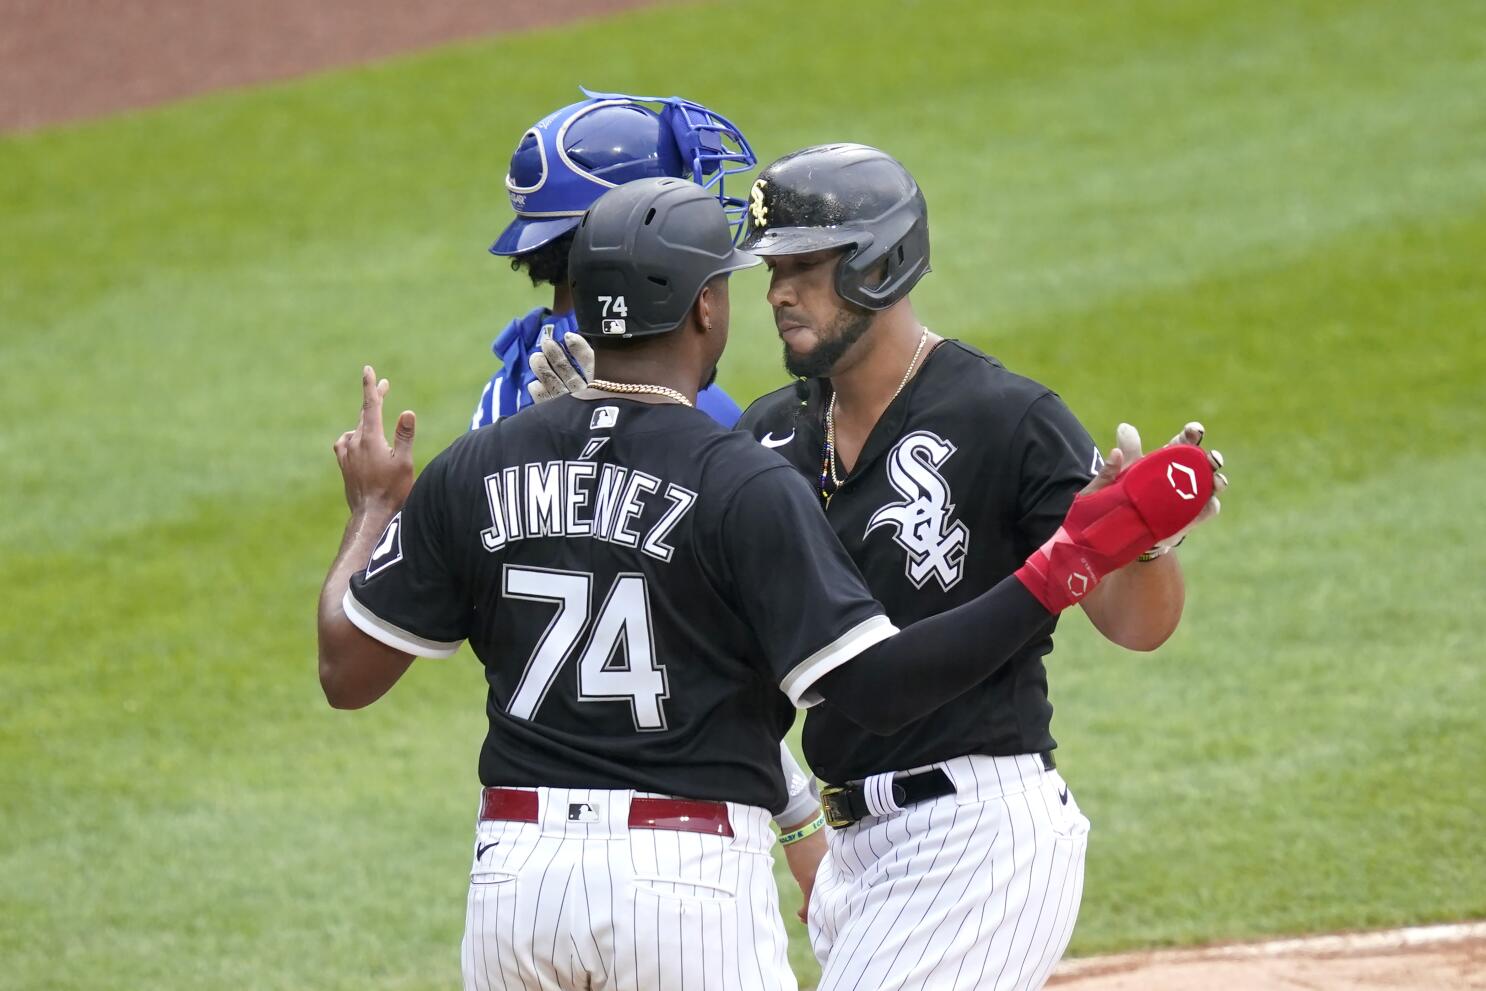 White Sox lose to Rays, Abreu homers for third straight game